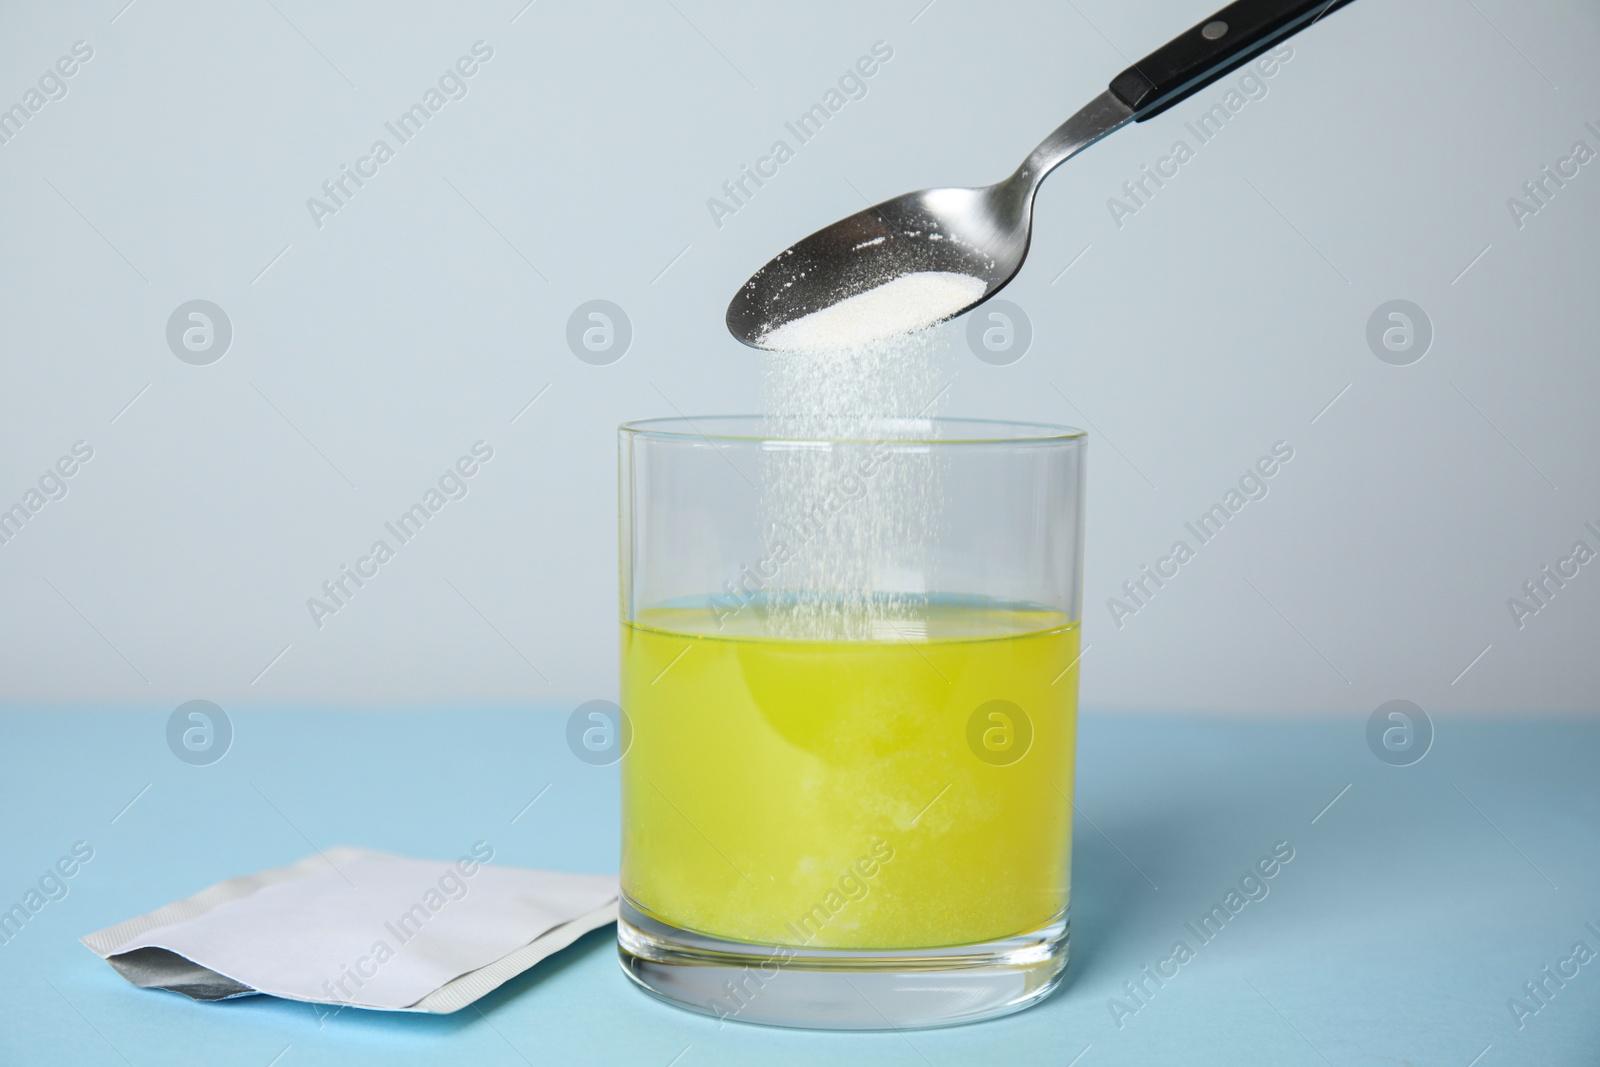 Photo of Pouring medicine into glass of water near sachet on turquoise table